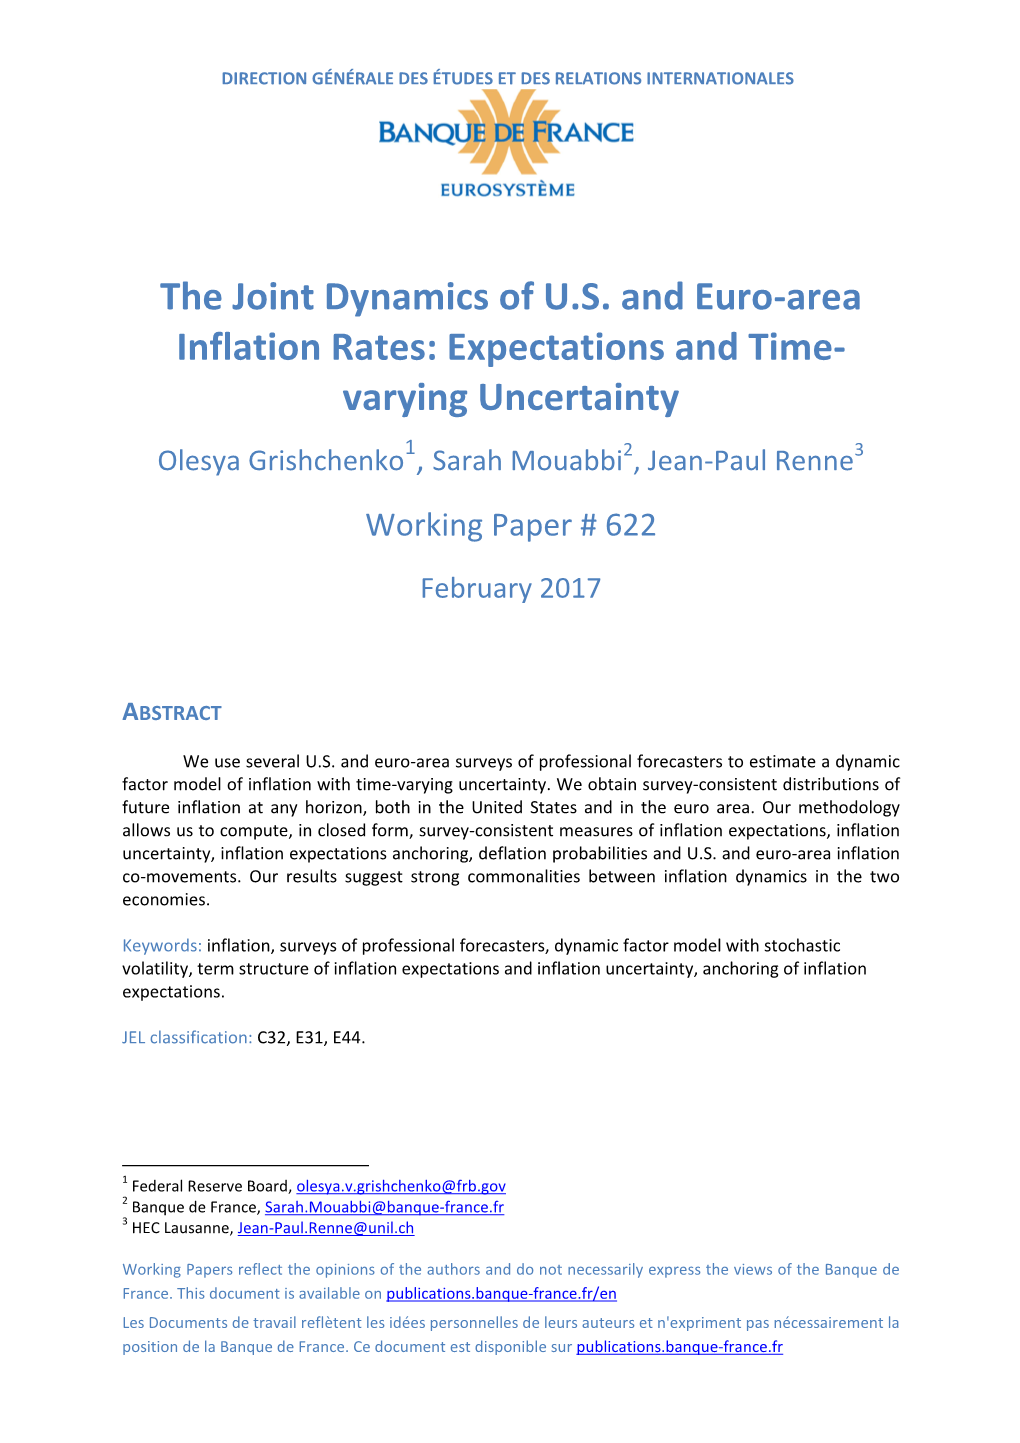 The Joint Dynamics of U.S. and Euro-Area Inflation Rates: Expectations and Time- Varying Uncertainty